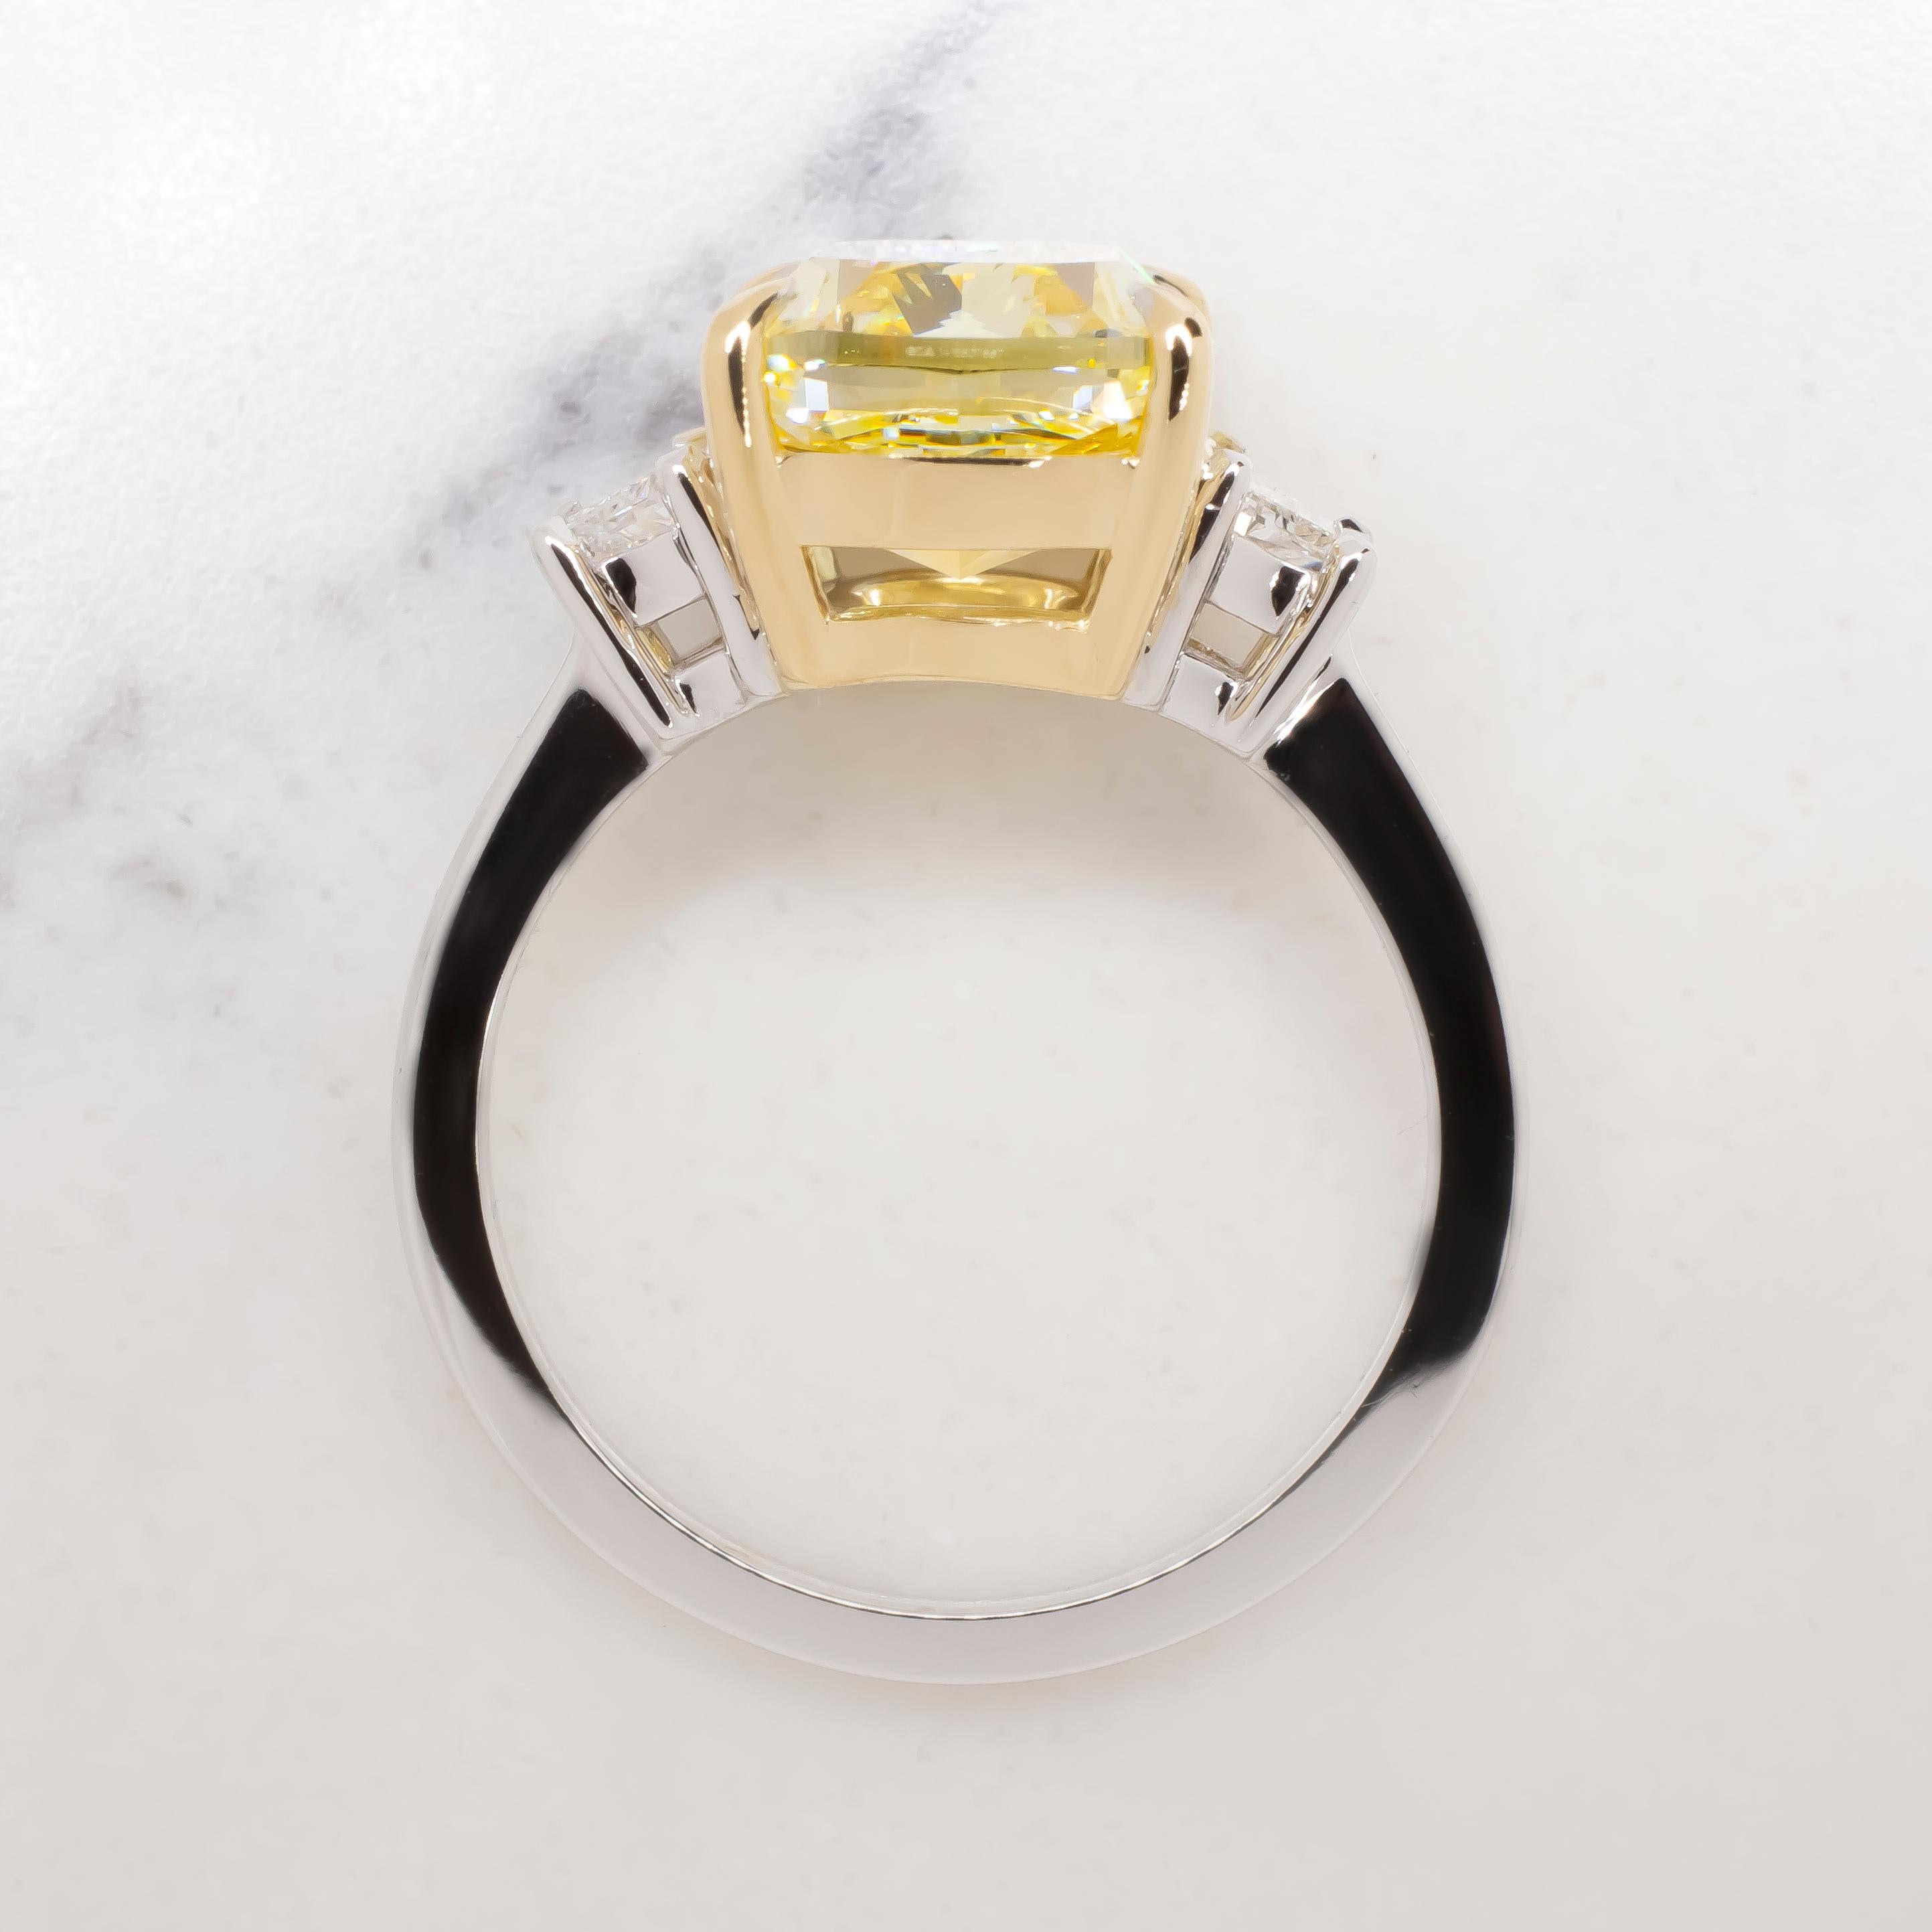 Cushion Cut Made in Italy GIA Certified 6 Carat Fancy Yellow Diamond Ring VVS2 Clarity For Sale